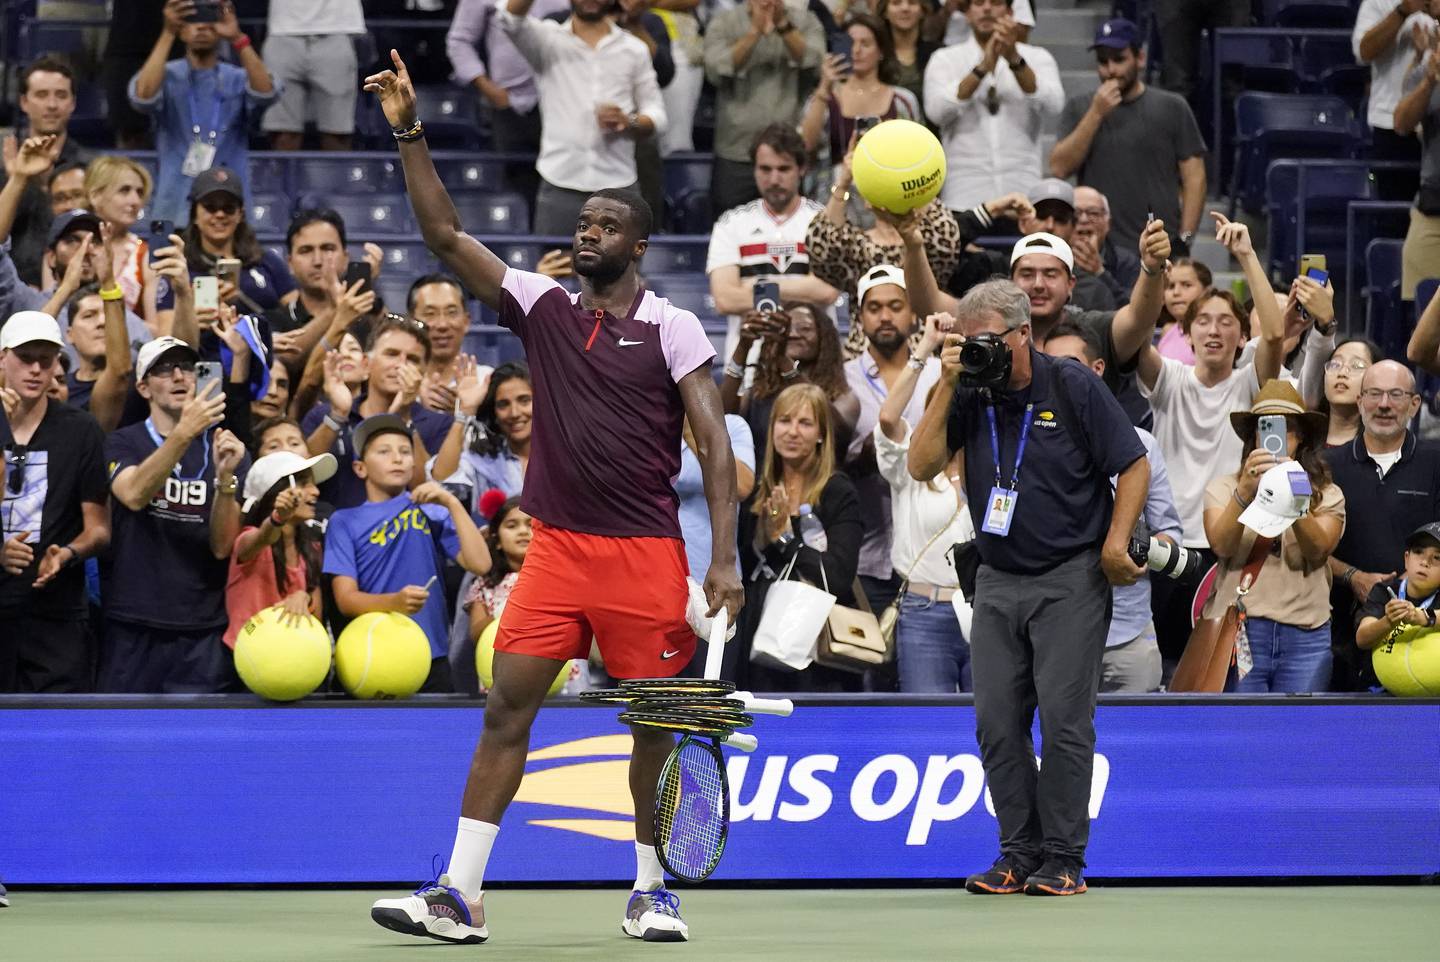 Frances Tiafoe, of the United States, acknowledges the crowd after losing to Carlos Alcaraz, of Spain, during the semifinals of the U.S. Open tennis championships, Friday, Sept. 9, 2022, in New York.